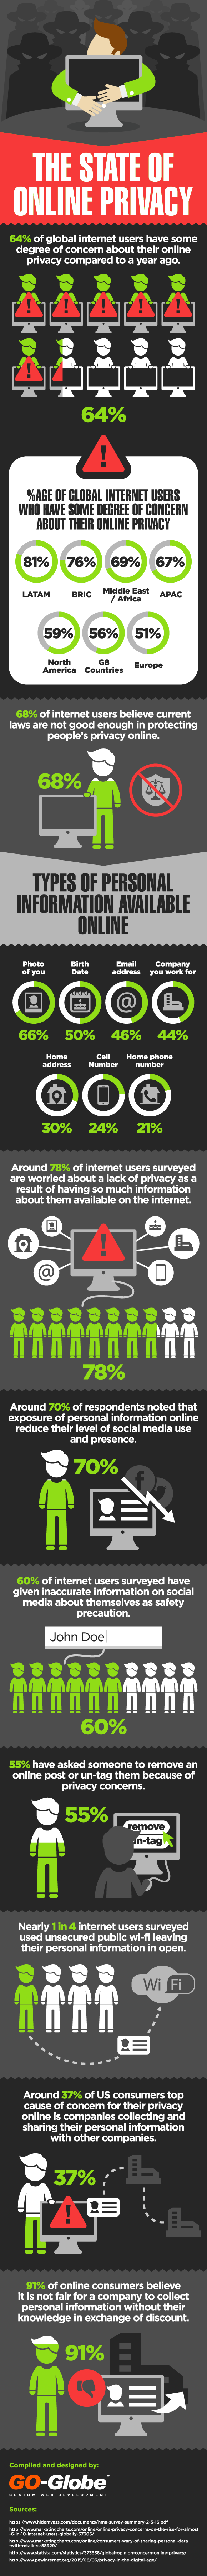 The State of Online Privacy Infographic